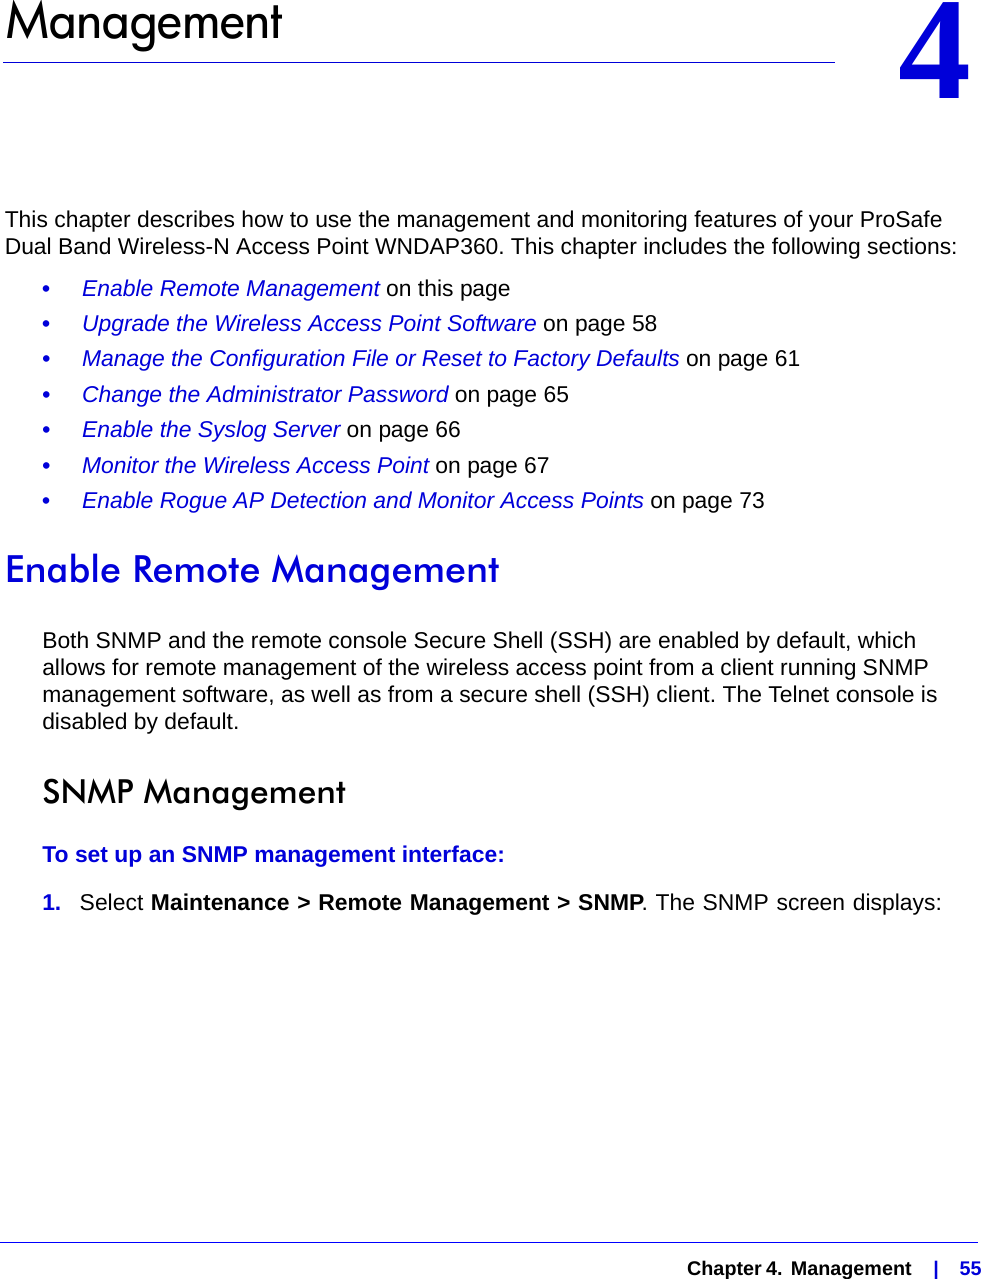   Chapter 4.  Management    |    5544.   ManagementThis chapter describes how to use the management and monitoring features of your ProSafe Dual Band Wireless-N Access Point WNDAP360. This chapter includes the following sections:•     Enable Remote Management on this page•     Upgrade the Wireless Access Point Software on page 58•     Manage the Configuration File or Reset to Factory Defaults on page 61•     Change the Administrator Password on page 65•     Enable the Syslog Server on page 66•     Monitor the Wireless Access Point on page 67•     Enable Rogue AP Detection and Monitor Access Points on page 73Enable Remote ManagementBoth SNMP and the remote console Secure Shell (SSH) are enabled by default, which allows for remote management of the wireless access point from a client running SNMP management software, as well as from a secure shell (SSH) client. The Telnet console is disabled by default.SNMP ManagementTo set up an SNMP management interface:1.  Select Maintenance &gt; Remote Management &gt; SNMP. The SNMP screen displays: